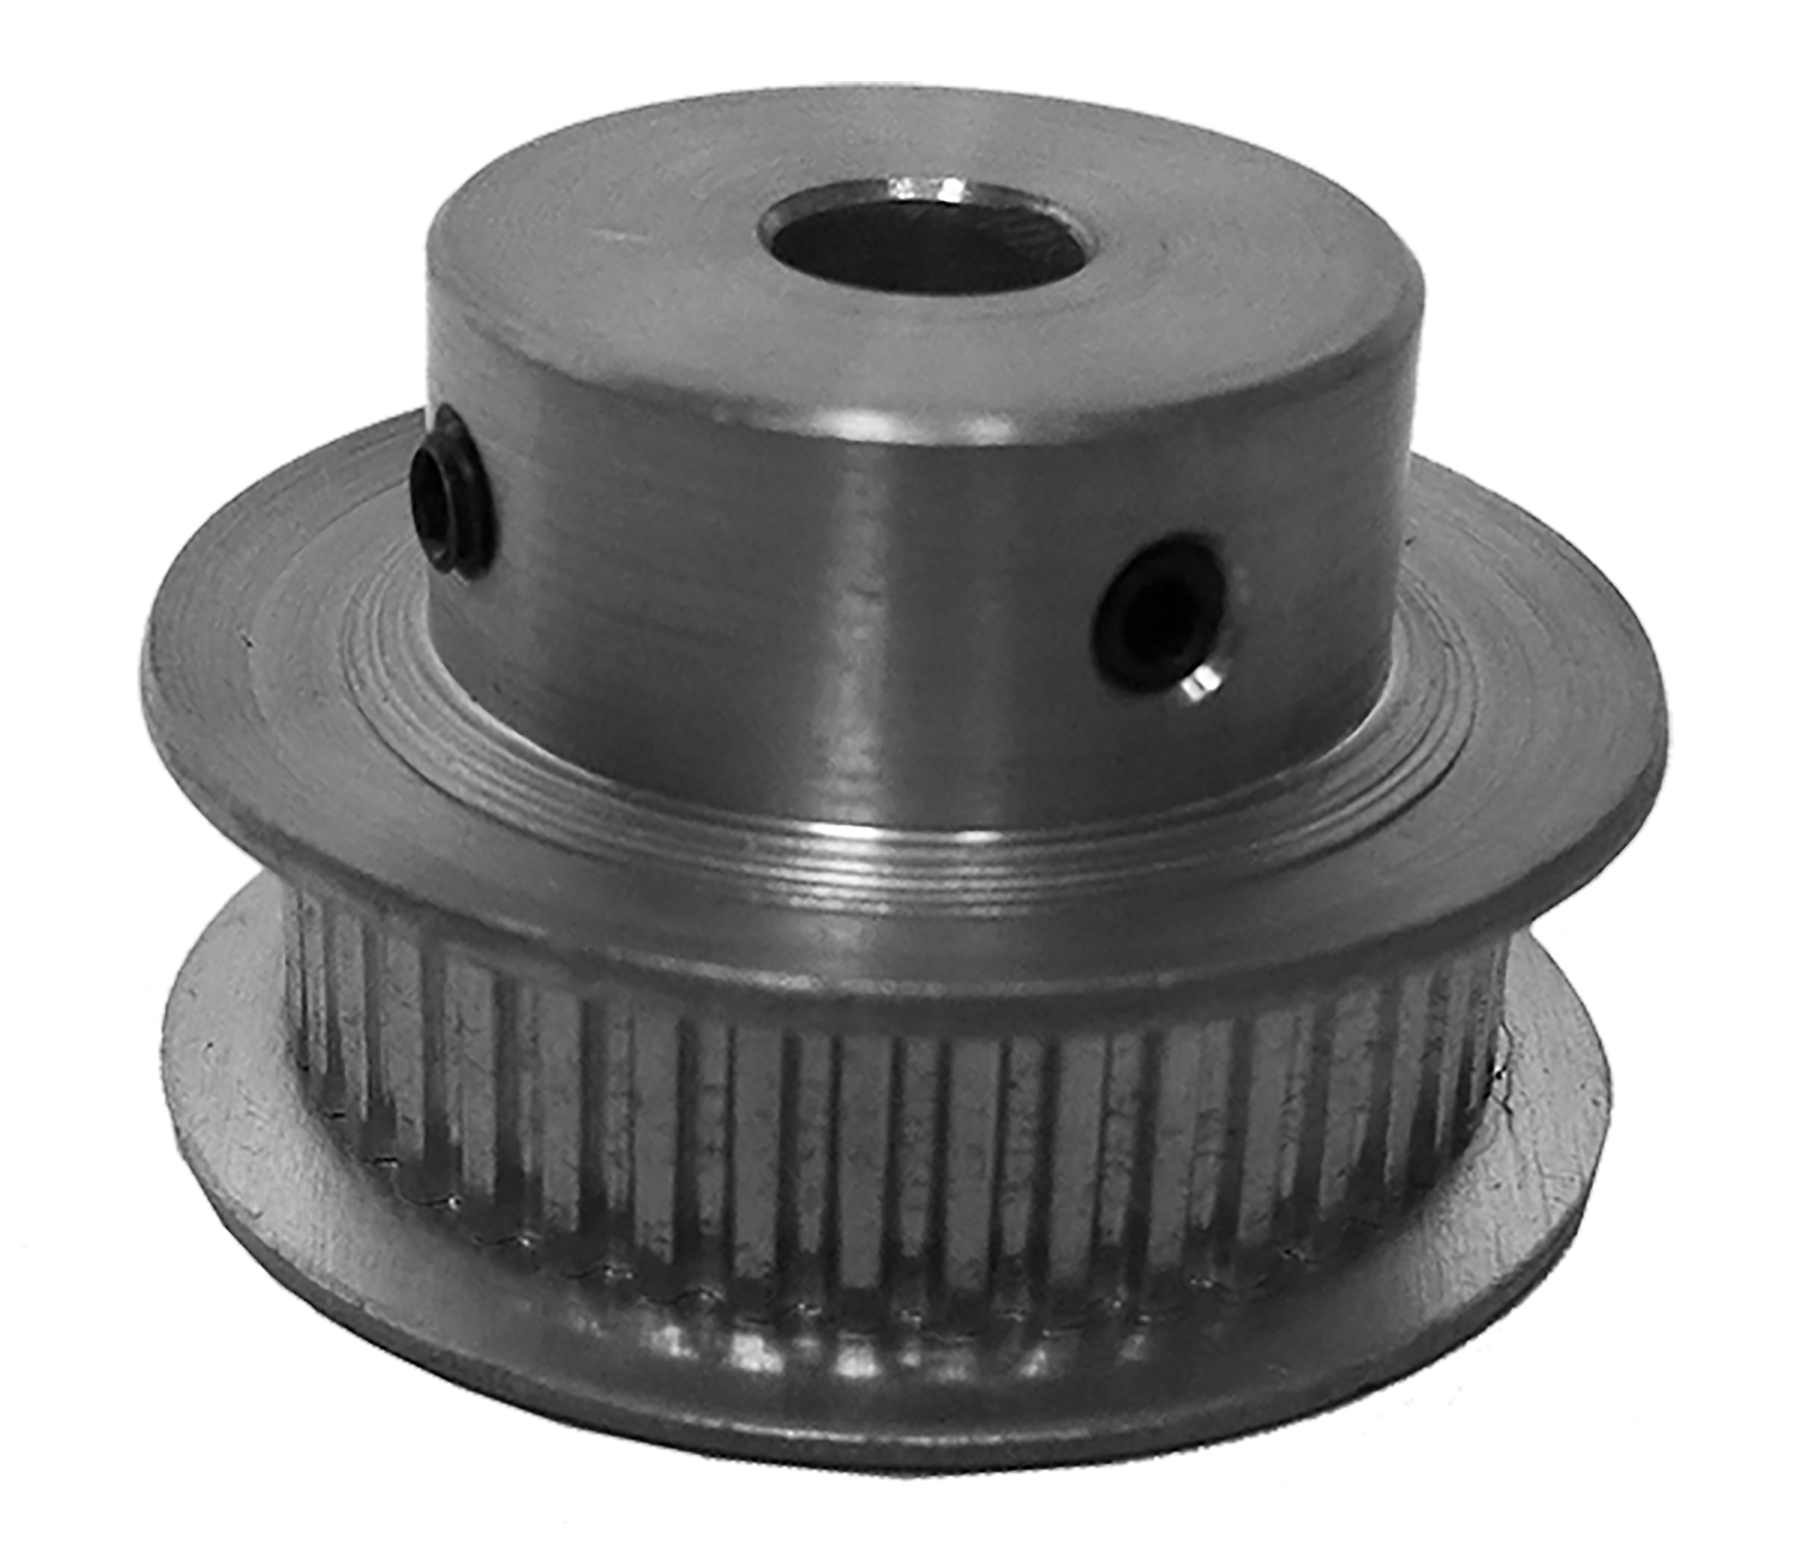 22MP025-6FA2 - Aluminum Imperial Pitch Pulleys